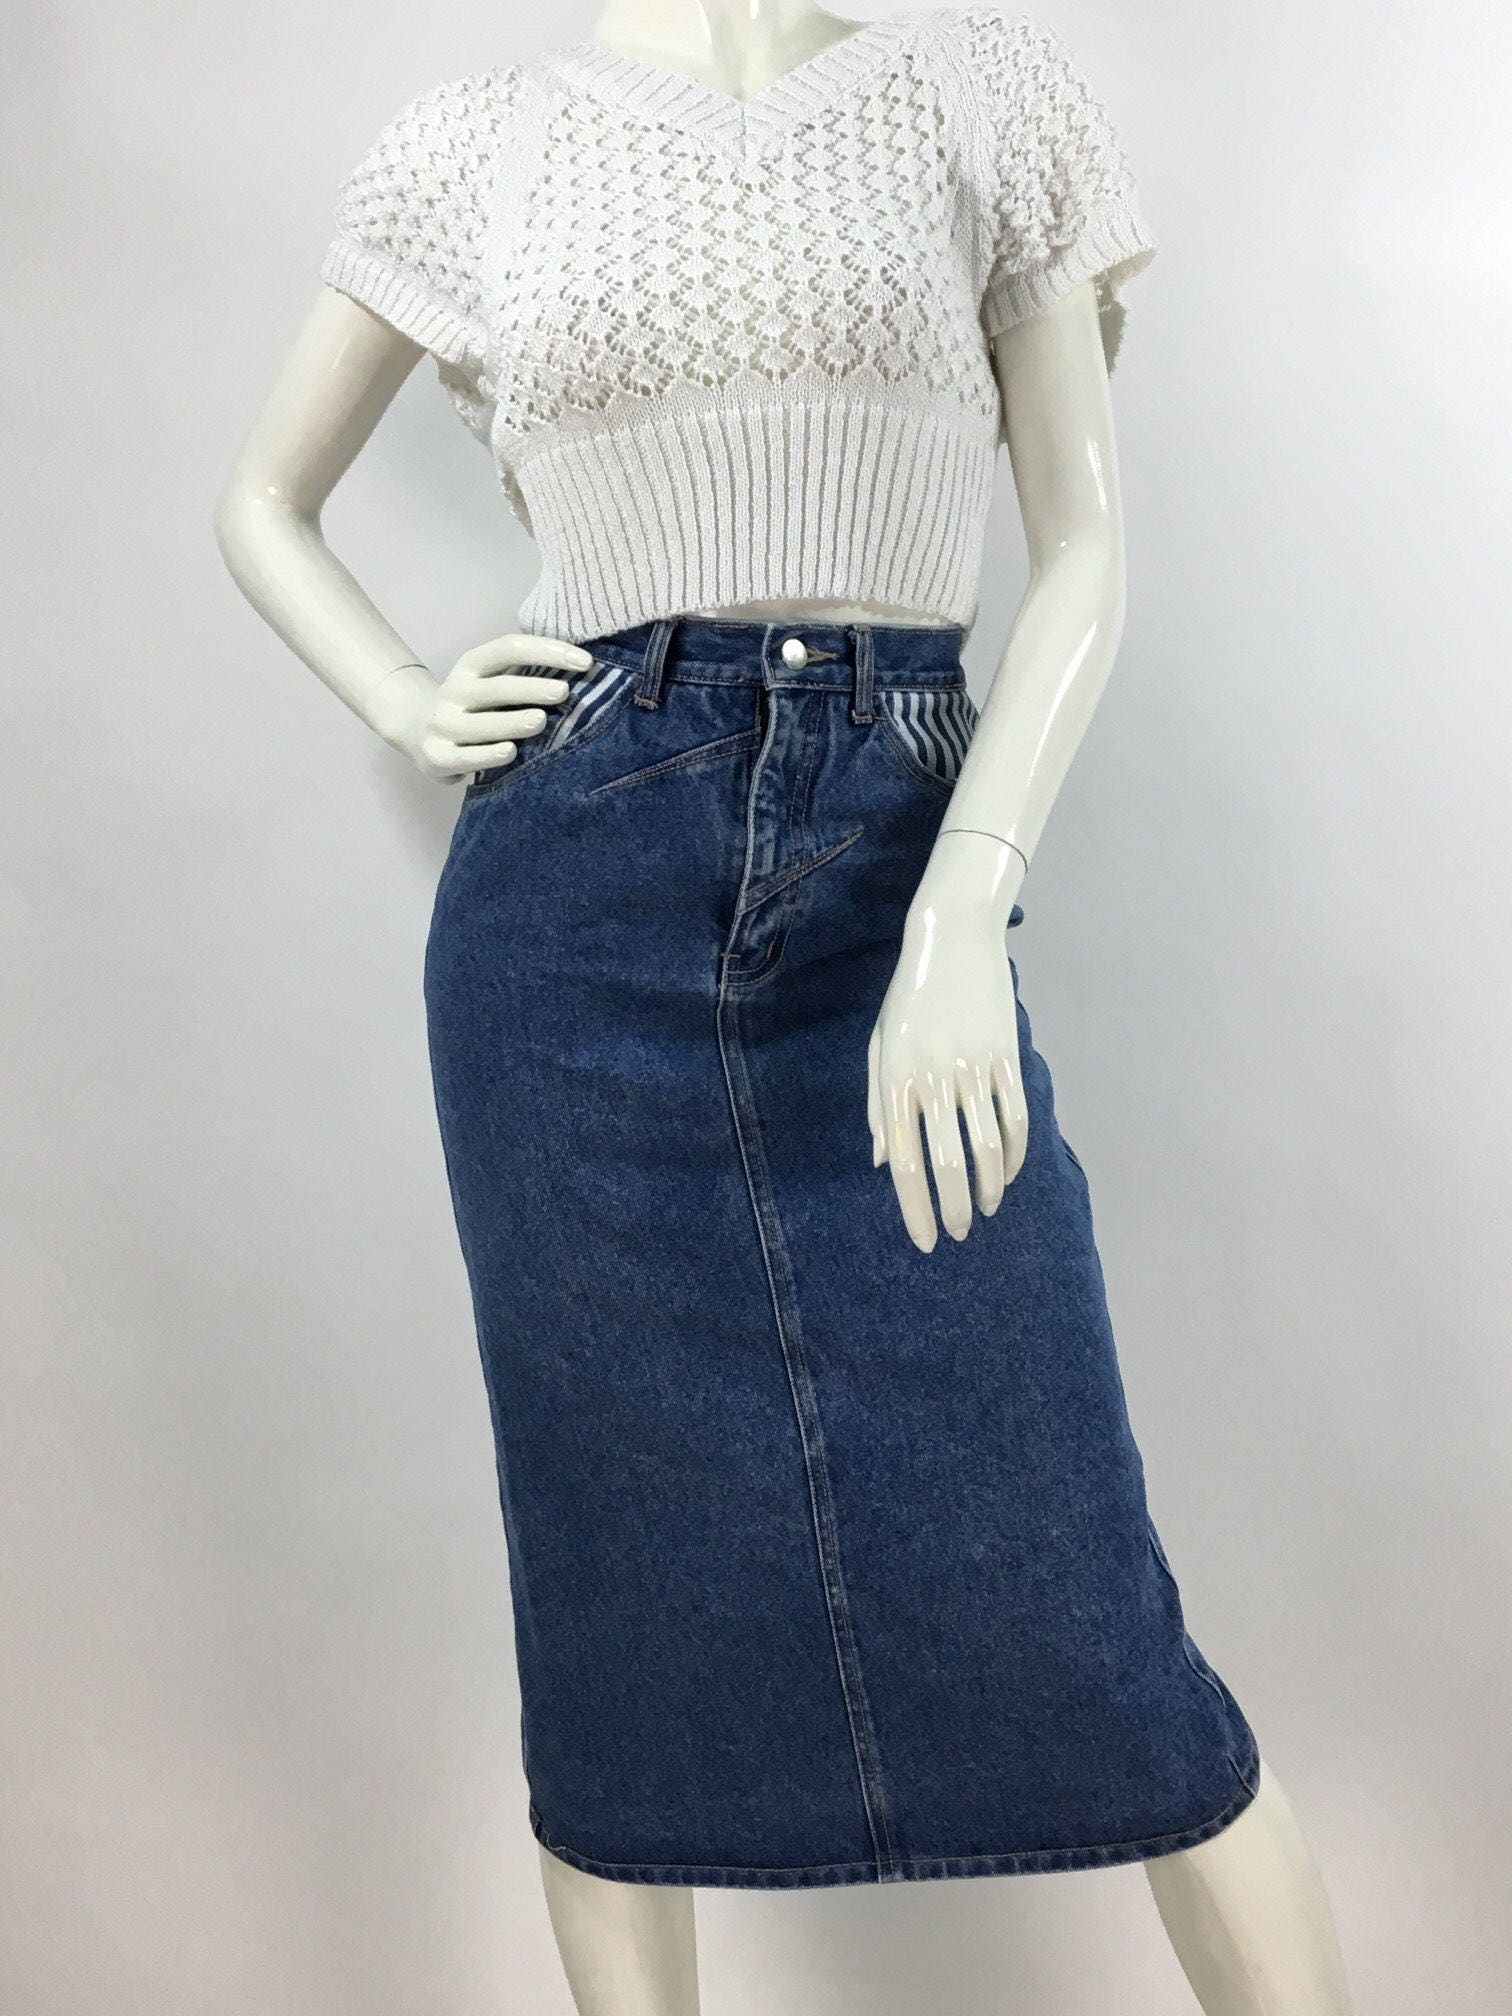 90s Jean Skirt/late 80s Early 90s Jean Skirt/vintage Jean - Etsy